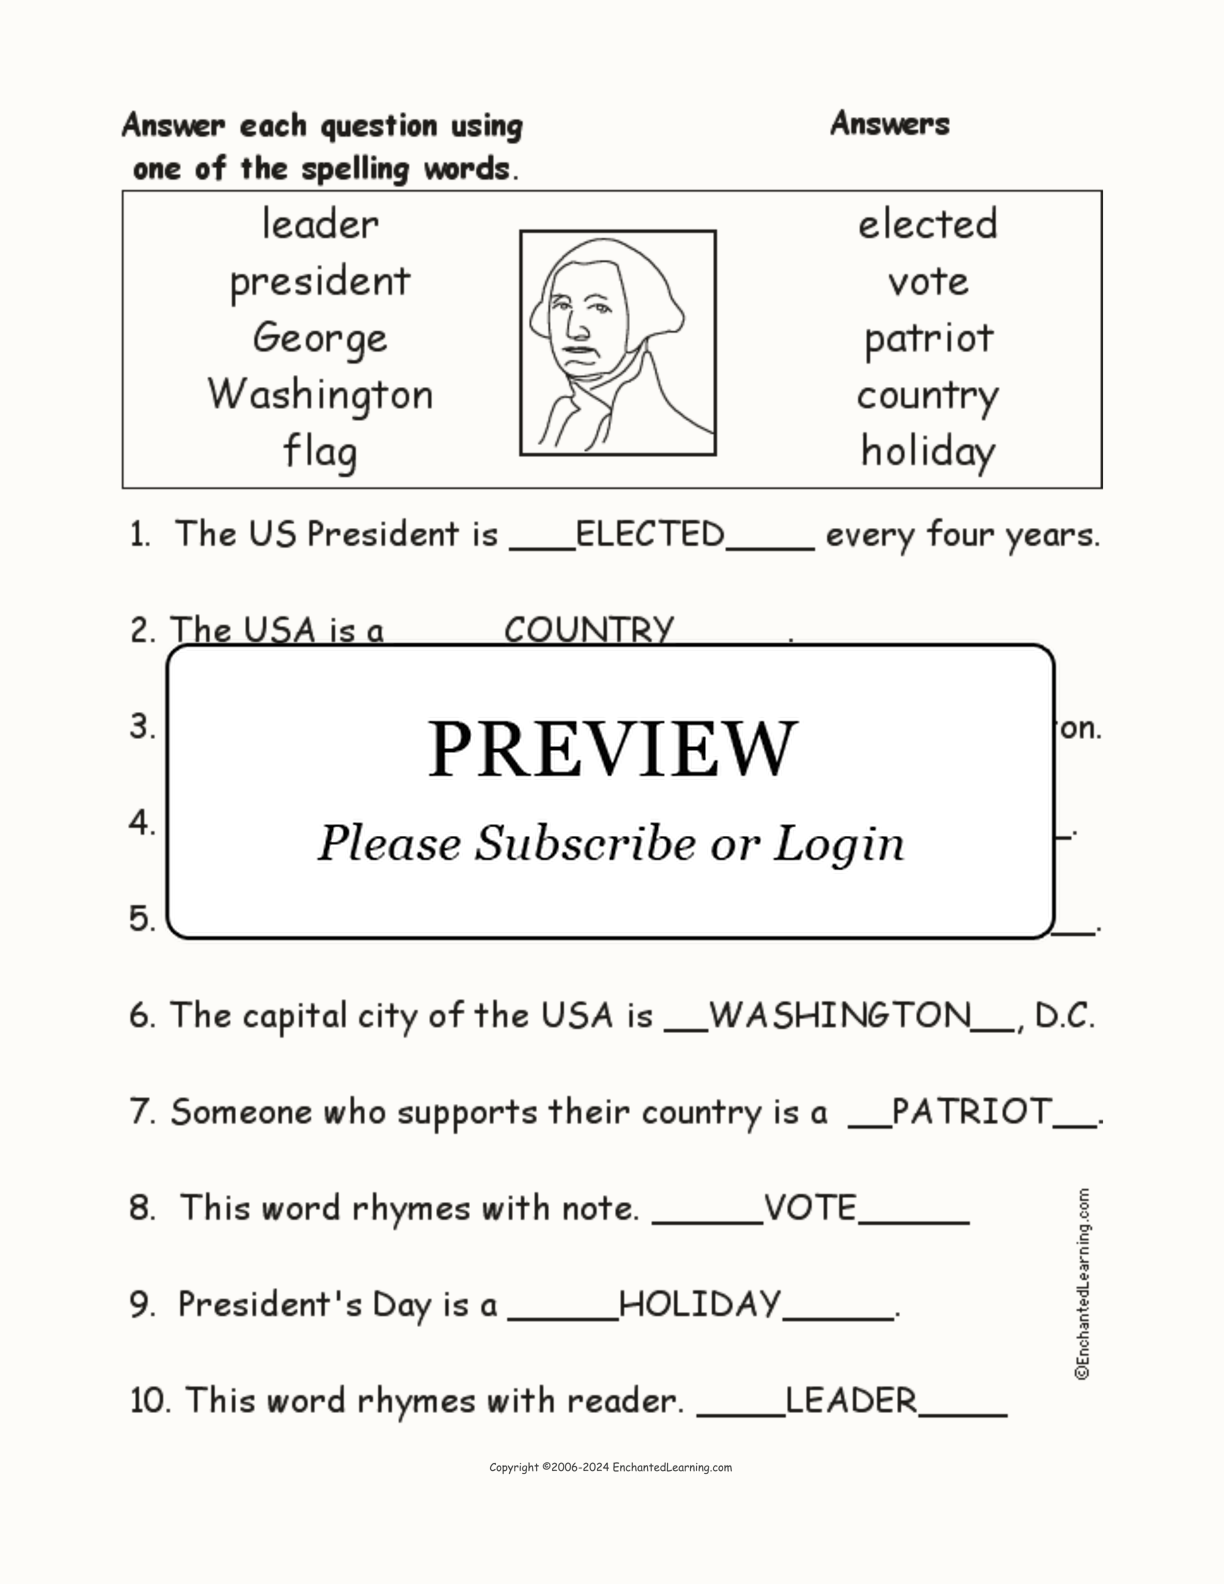 Presidents' Day Spelling Word Questions interactive worksheet page 2